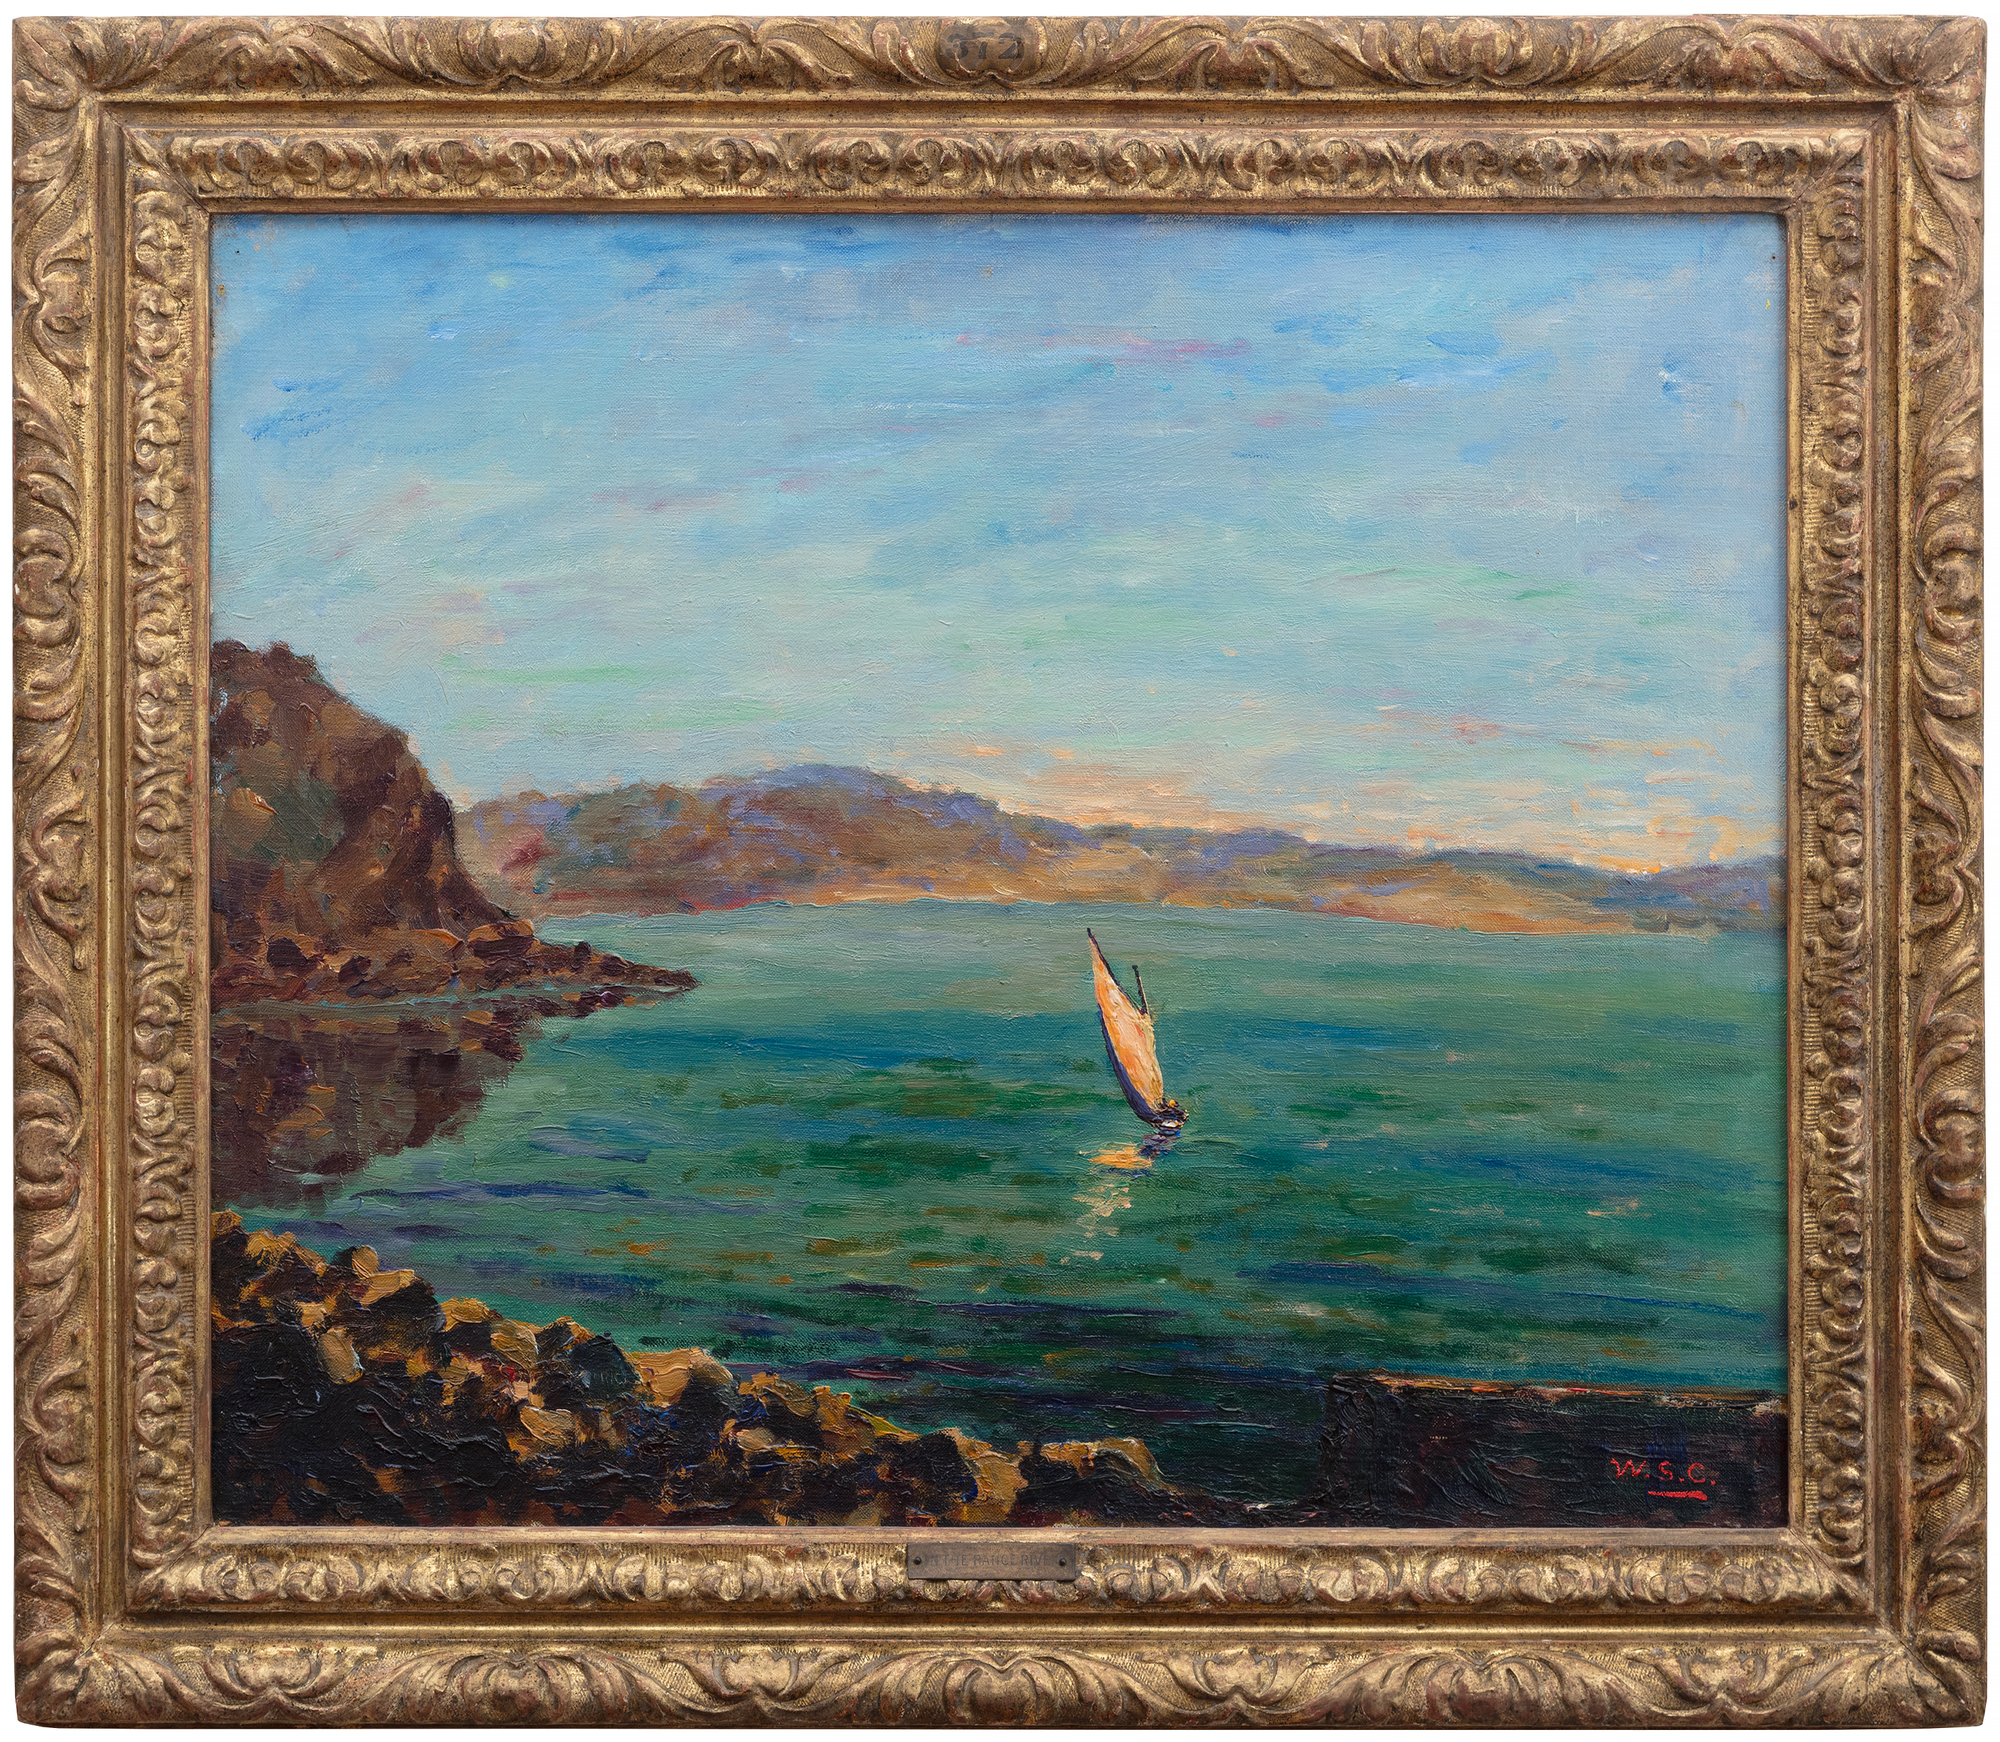 In 1955, Sir John Rothenstein, representing the Trustees of the Tate Museum, approached Winston Churchill about donating one of his paintings "as a gift to the nation."  Churchill was flattered, but felt he did not deserve such an honor as an artist.  Eventually, Churchill agreed and sent two candidate paintings to the Tate – On the Rance and Loup River.  No record exists regarding his own thoughts on the works he submitted, but one can safely say that Churchill thought highly of On the Rance, especially since it was not one of the paintings Rothenstein identified as a strong option. Loup River, which clearly matched Rothenstein's taste, was selected.  Not only was On the Rance not returned, but somehow it ended up, without any inventory record, in a basement storeroom at the Tate. In the storeroom it sat for almost a half century, when it was discovered by an intern.  The Churchill family was notified and eventually the painting was auctioned in June 2005, where it set a new auction record for Churchill's work, despite the lot notes hardly touching on the Tate’s possible acquisition. In a letter to the buyers, Churchill’s daughter, Lady Soames, summarized what had occurred in somewhat more detail.
<br>
<br>St. Malo is a walled city in Brittany, France on the coast of the English Channel. The city was nearly destroyed by bombings during WWII.